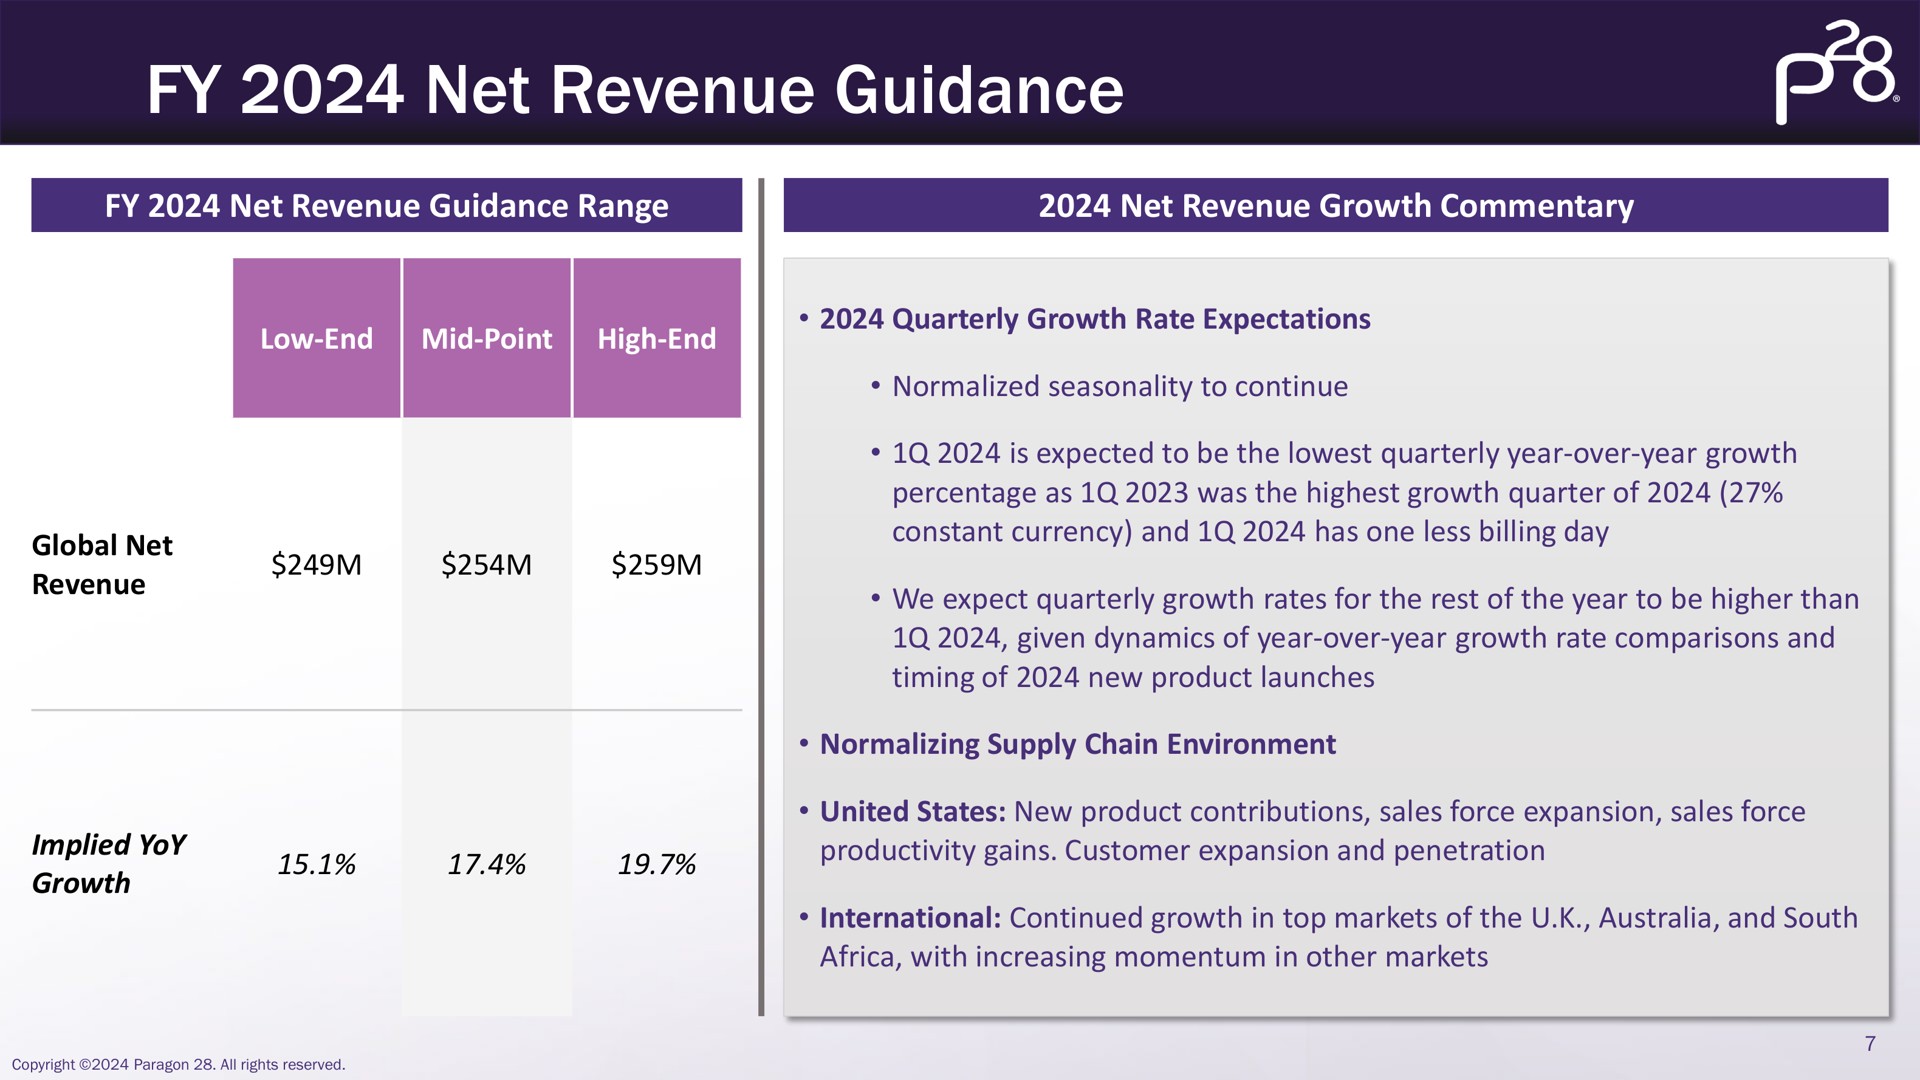 net revenue guidance net revenue guidance range net revenue growth commentary global | Paragon28